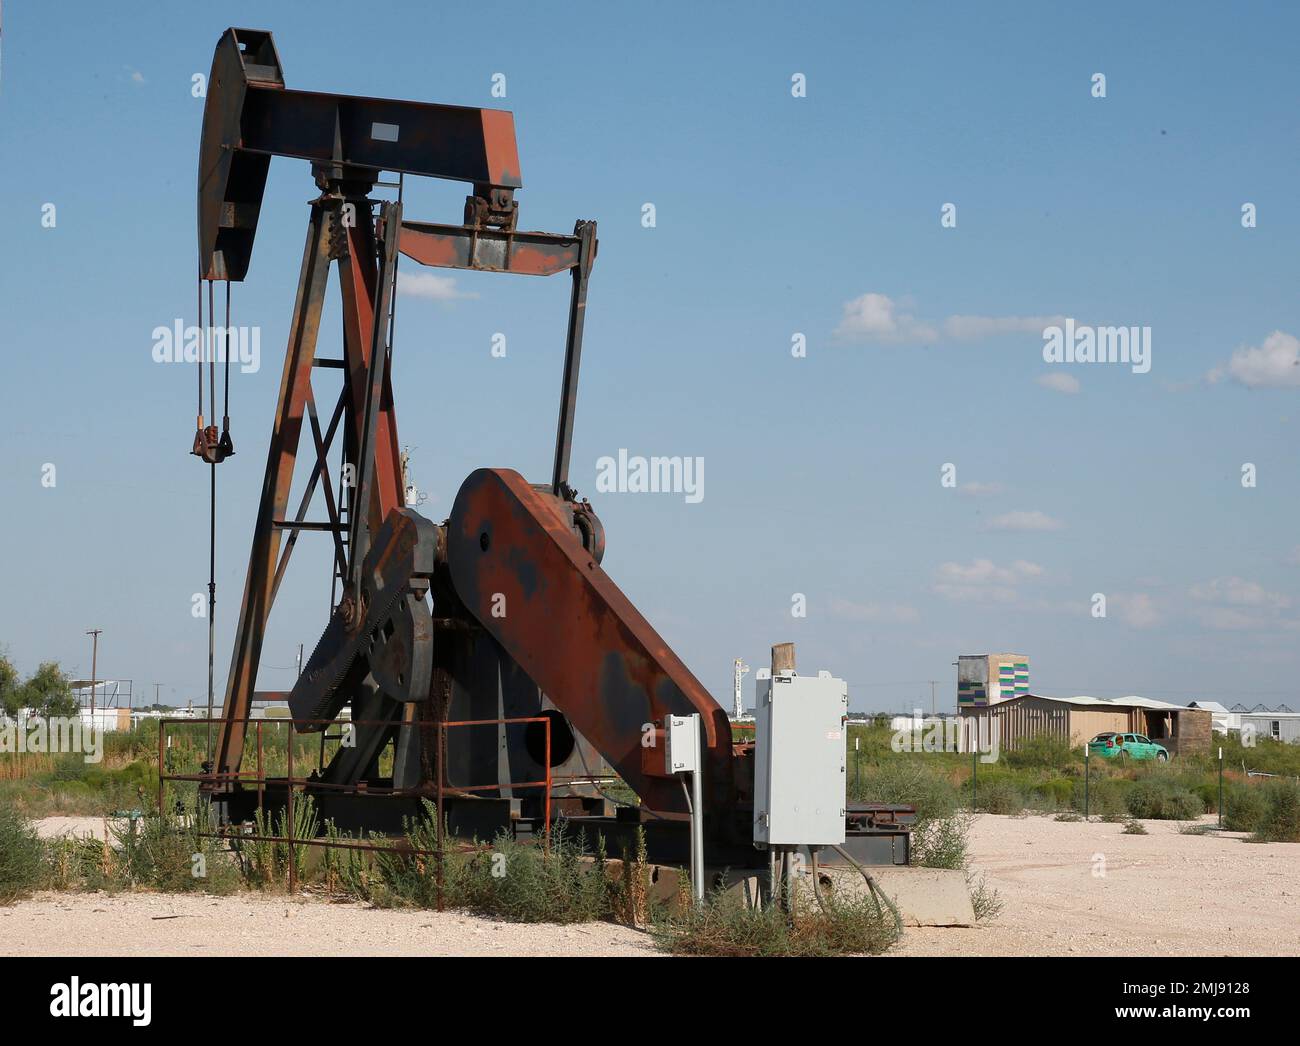 https://c8.alamy.com/comp/2MJ9128/the-home-of-seth-ator-the-alleged-gunman-in-a-west-texas-rampage-saturday-is-seen-to-the-right-of-a-pump-jack-monday-sept-2-2019-near-odessa-texas-officers-killed-36-year-old-ator-on-saturday-outside-a-busy-odessa-movie-theater-after-a-spate-of-violence-that-spanned-10-miles-16-kilometers-killing-multiple-people-and-injuring-around-two-dozen-others-ap-photosue-ogrocki-2MJ9128.jpg